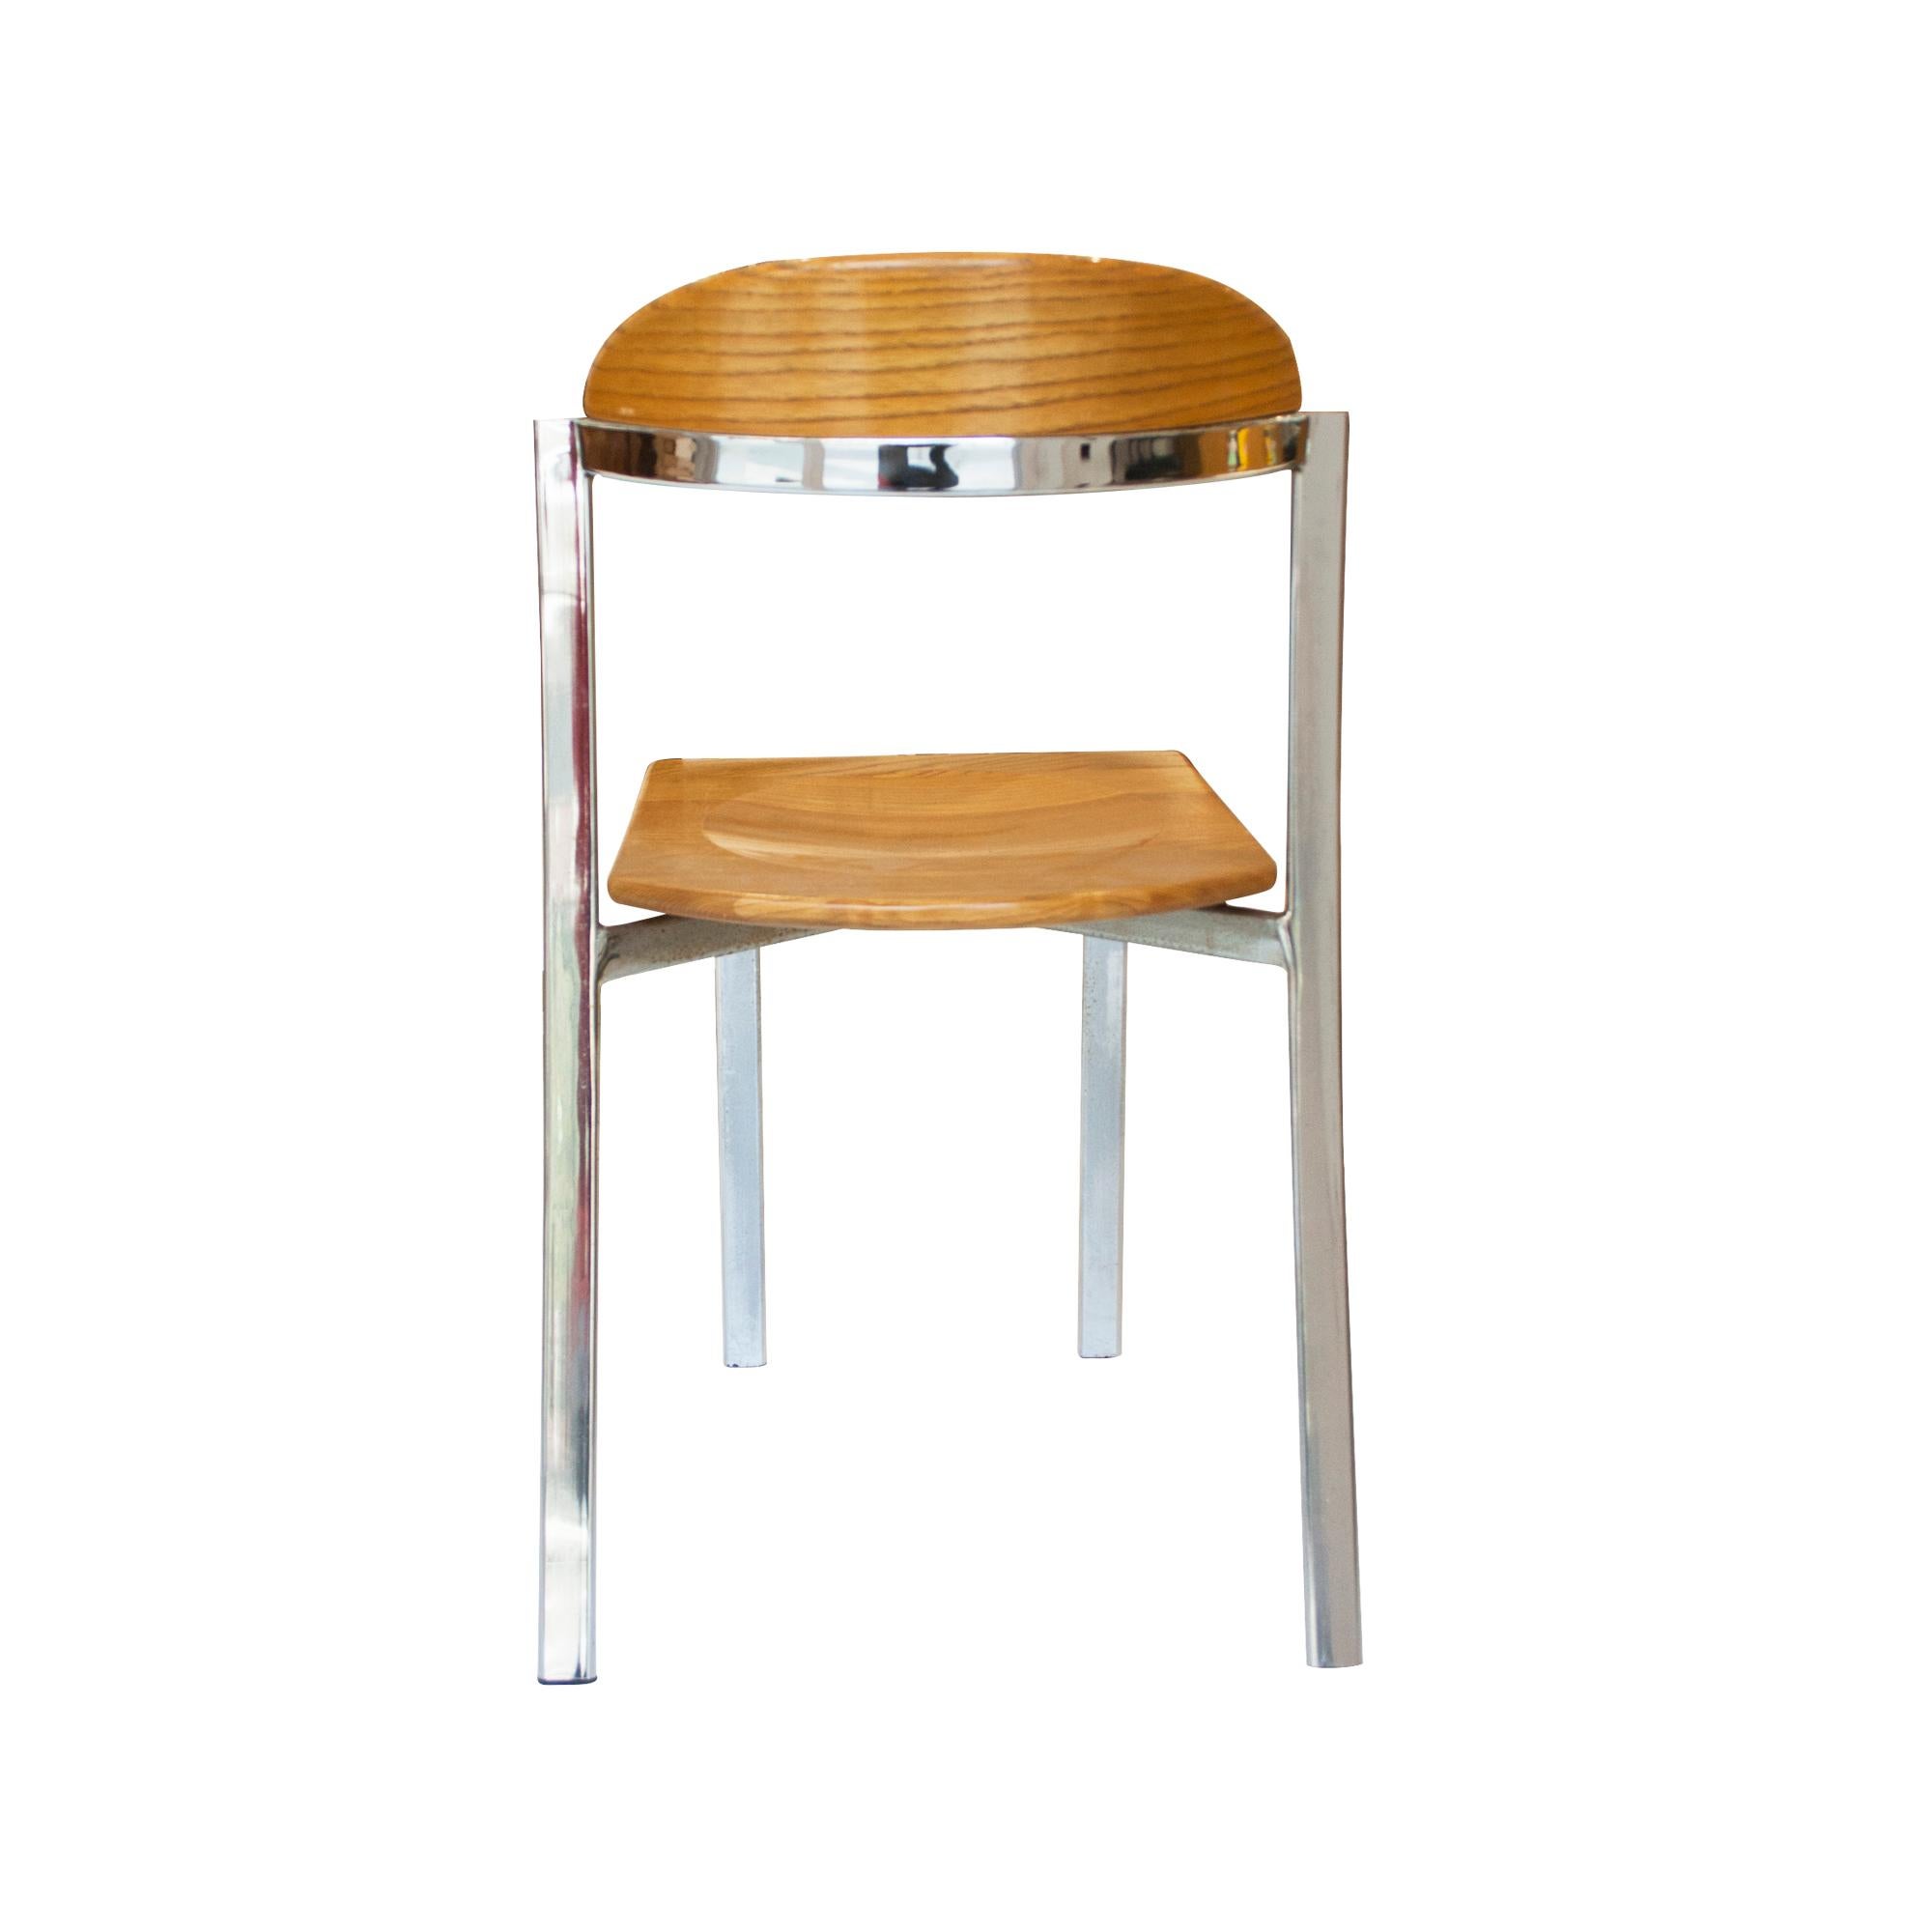 Late 20th Century Mid-Century Modern Oak and Chromed Steel Set of Chairs, Italy, 1970  For Sale